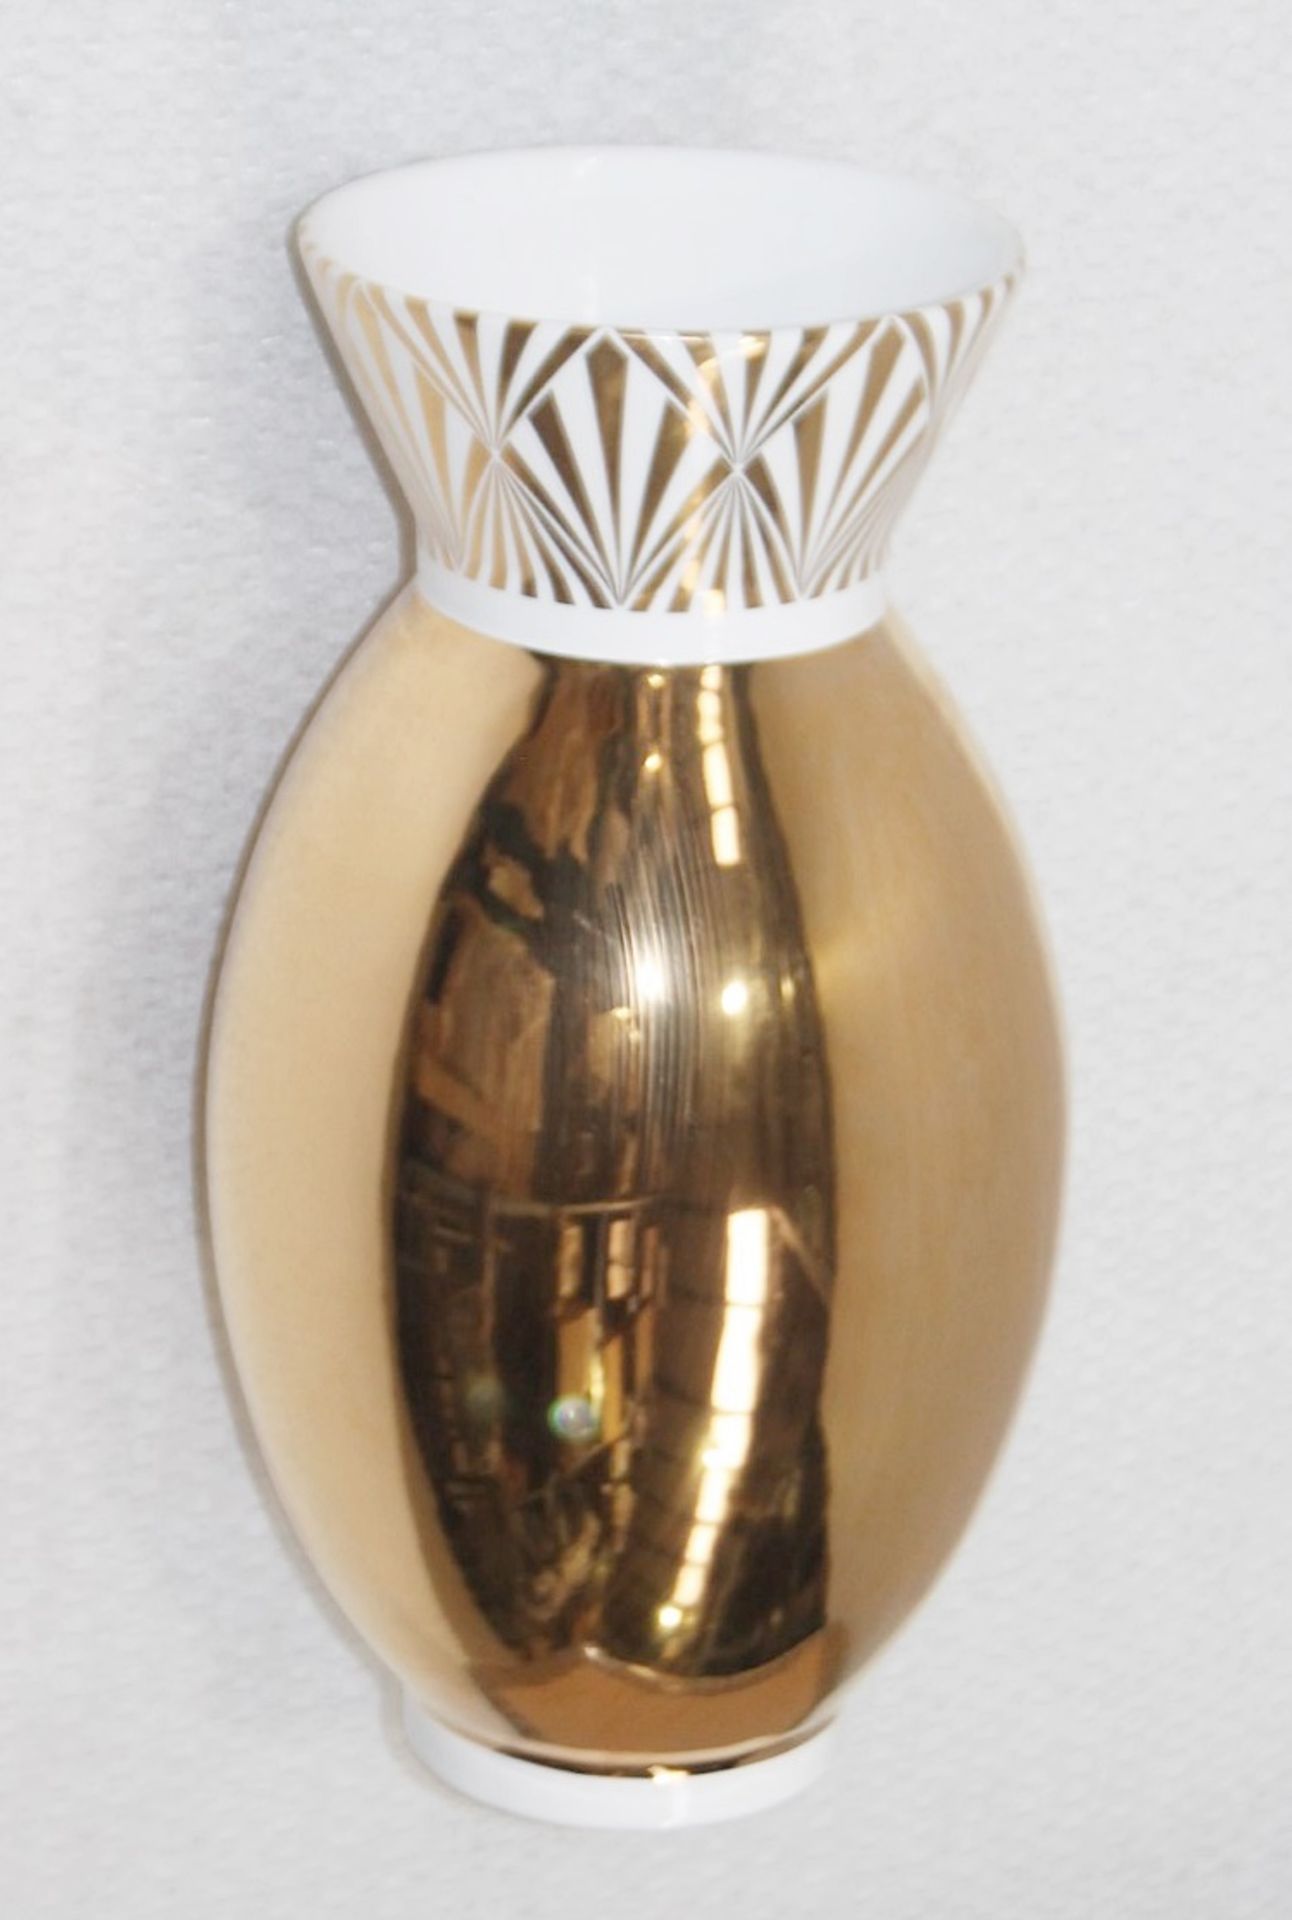 1 x VISIONNAIRE Large Luxury Vase Featuring An Art Deco Aesthetic And Gold Finish - Ref: HAS1588 - Image 3 of 3